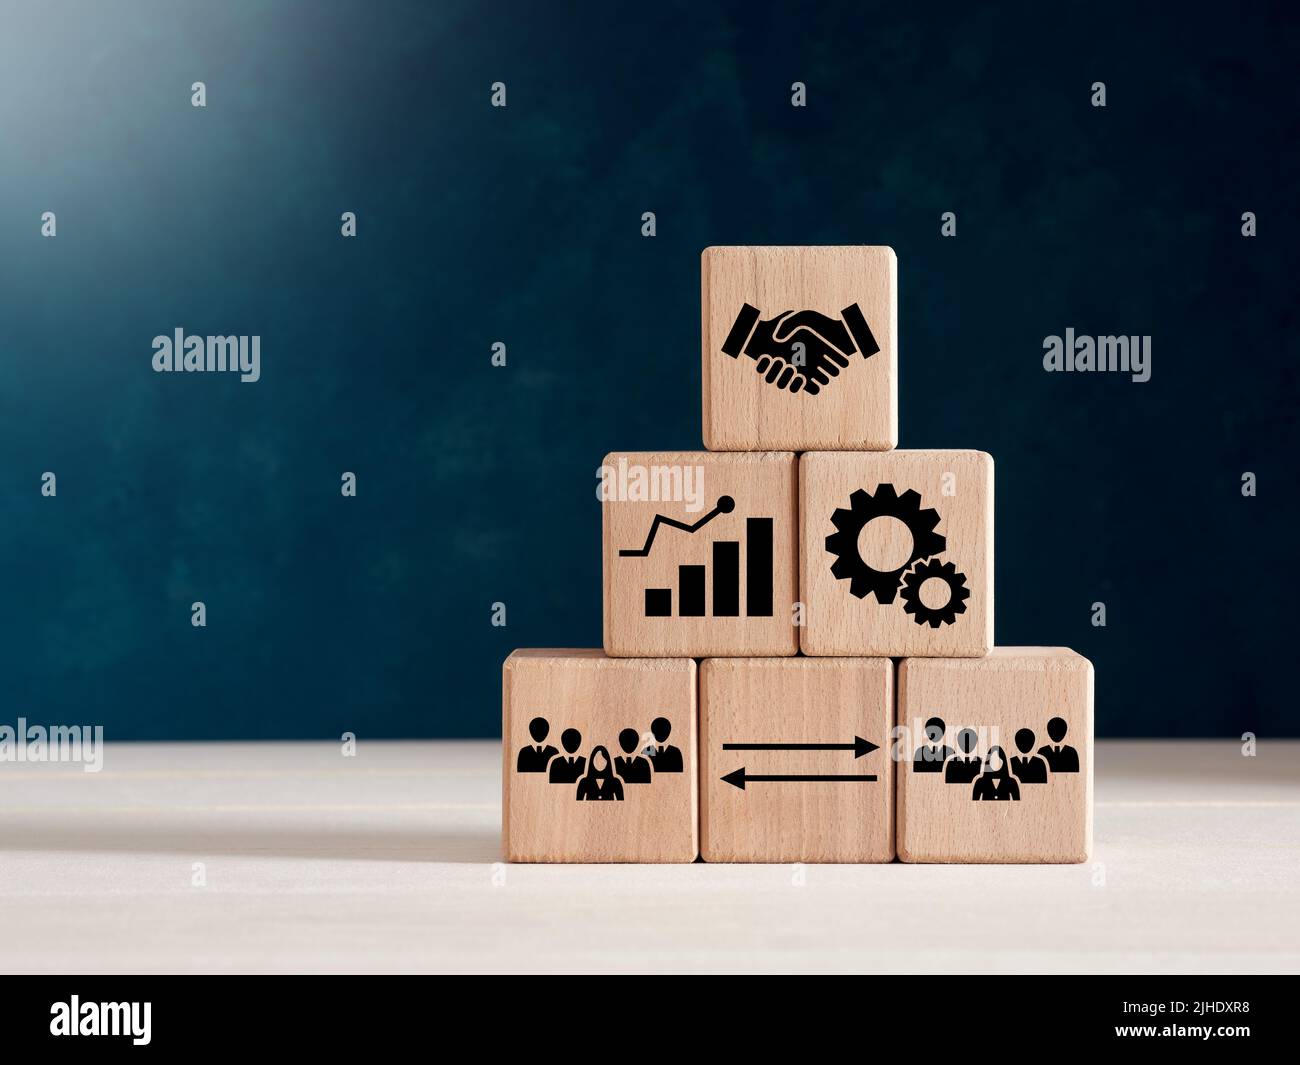 Business agreement, cooperation and efficiency concept. Wooden cube blocks with business agreement icons. Stock Photo